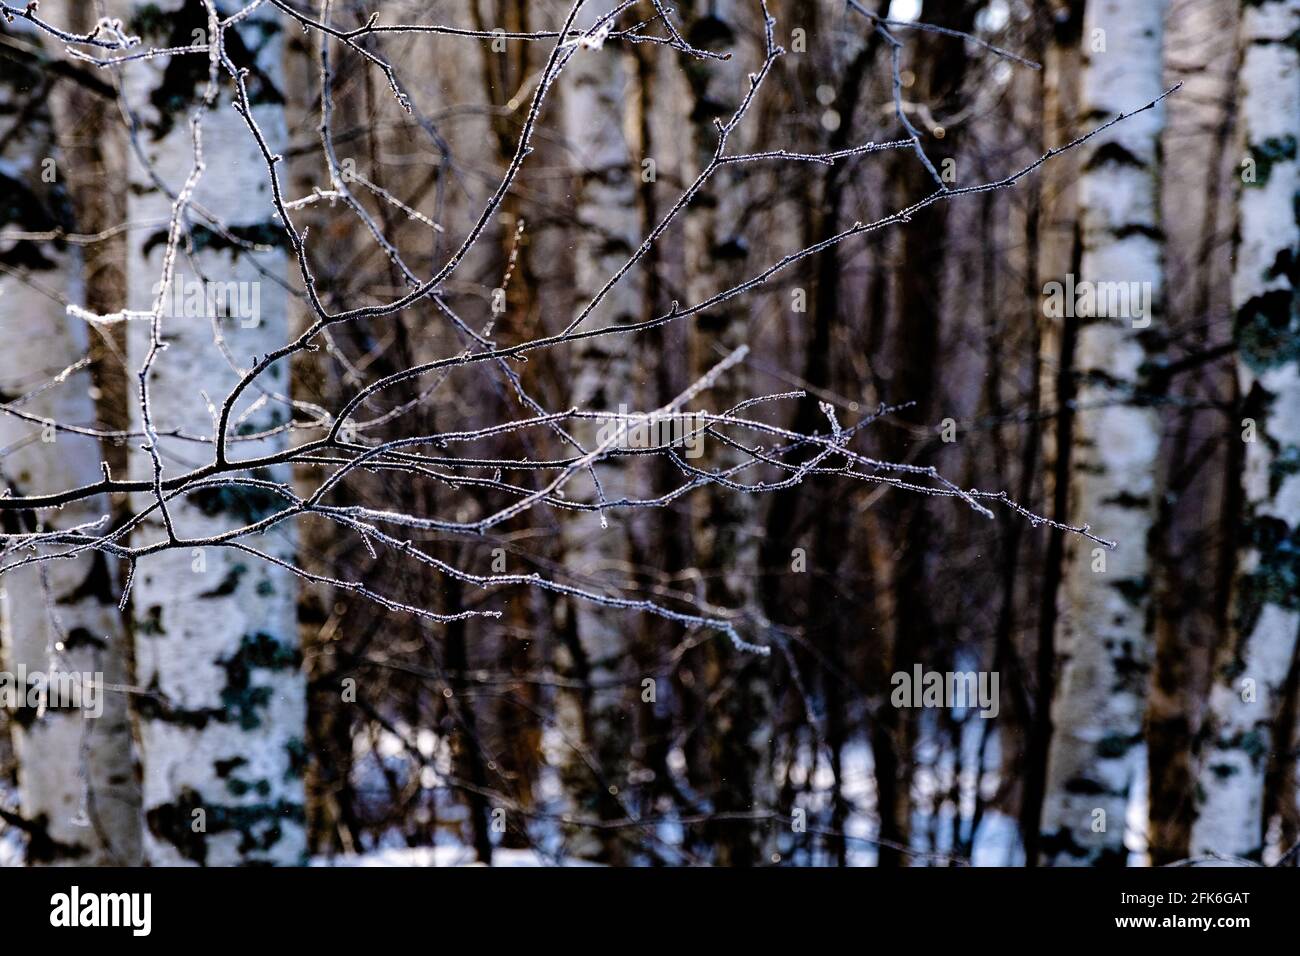 Thin branches without leaves covered with white frost on an indistinct background of birch trunks. Stock Photo